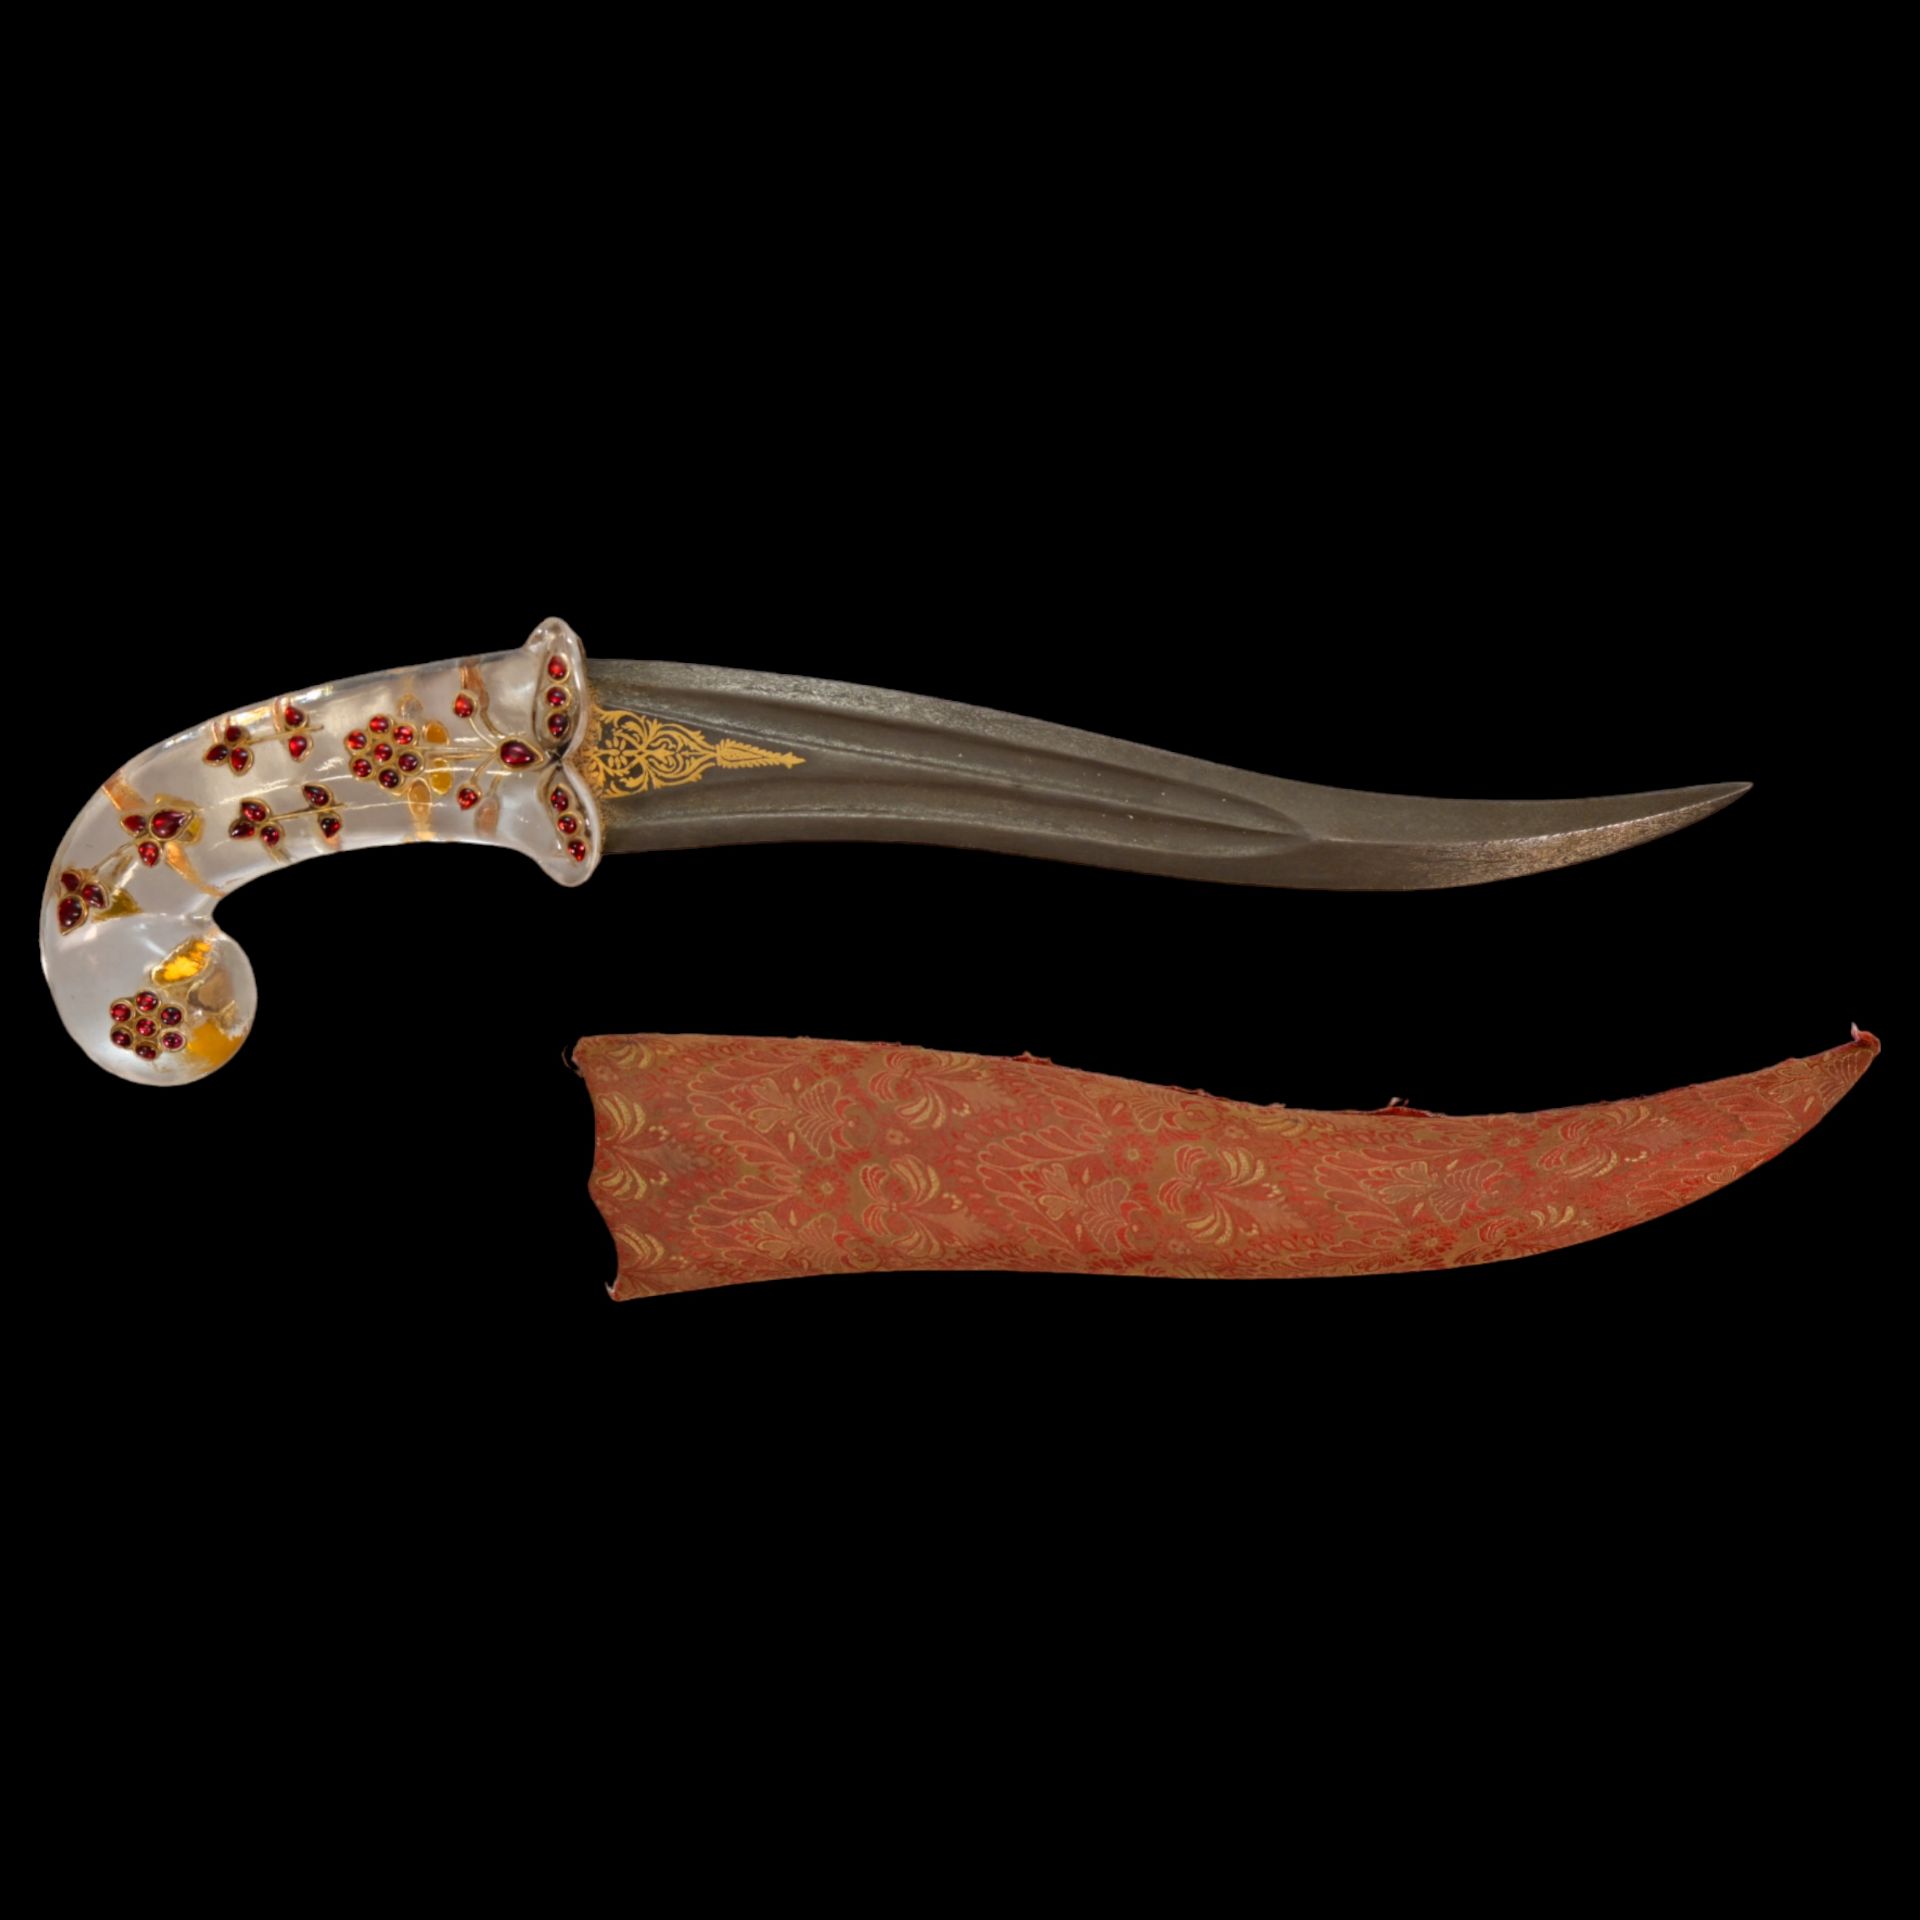 A Rare Mughal gem-set rock crystal hilted dagger with scabbard, India, 18th century. - Image 8 of 13